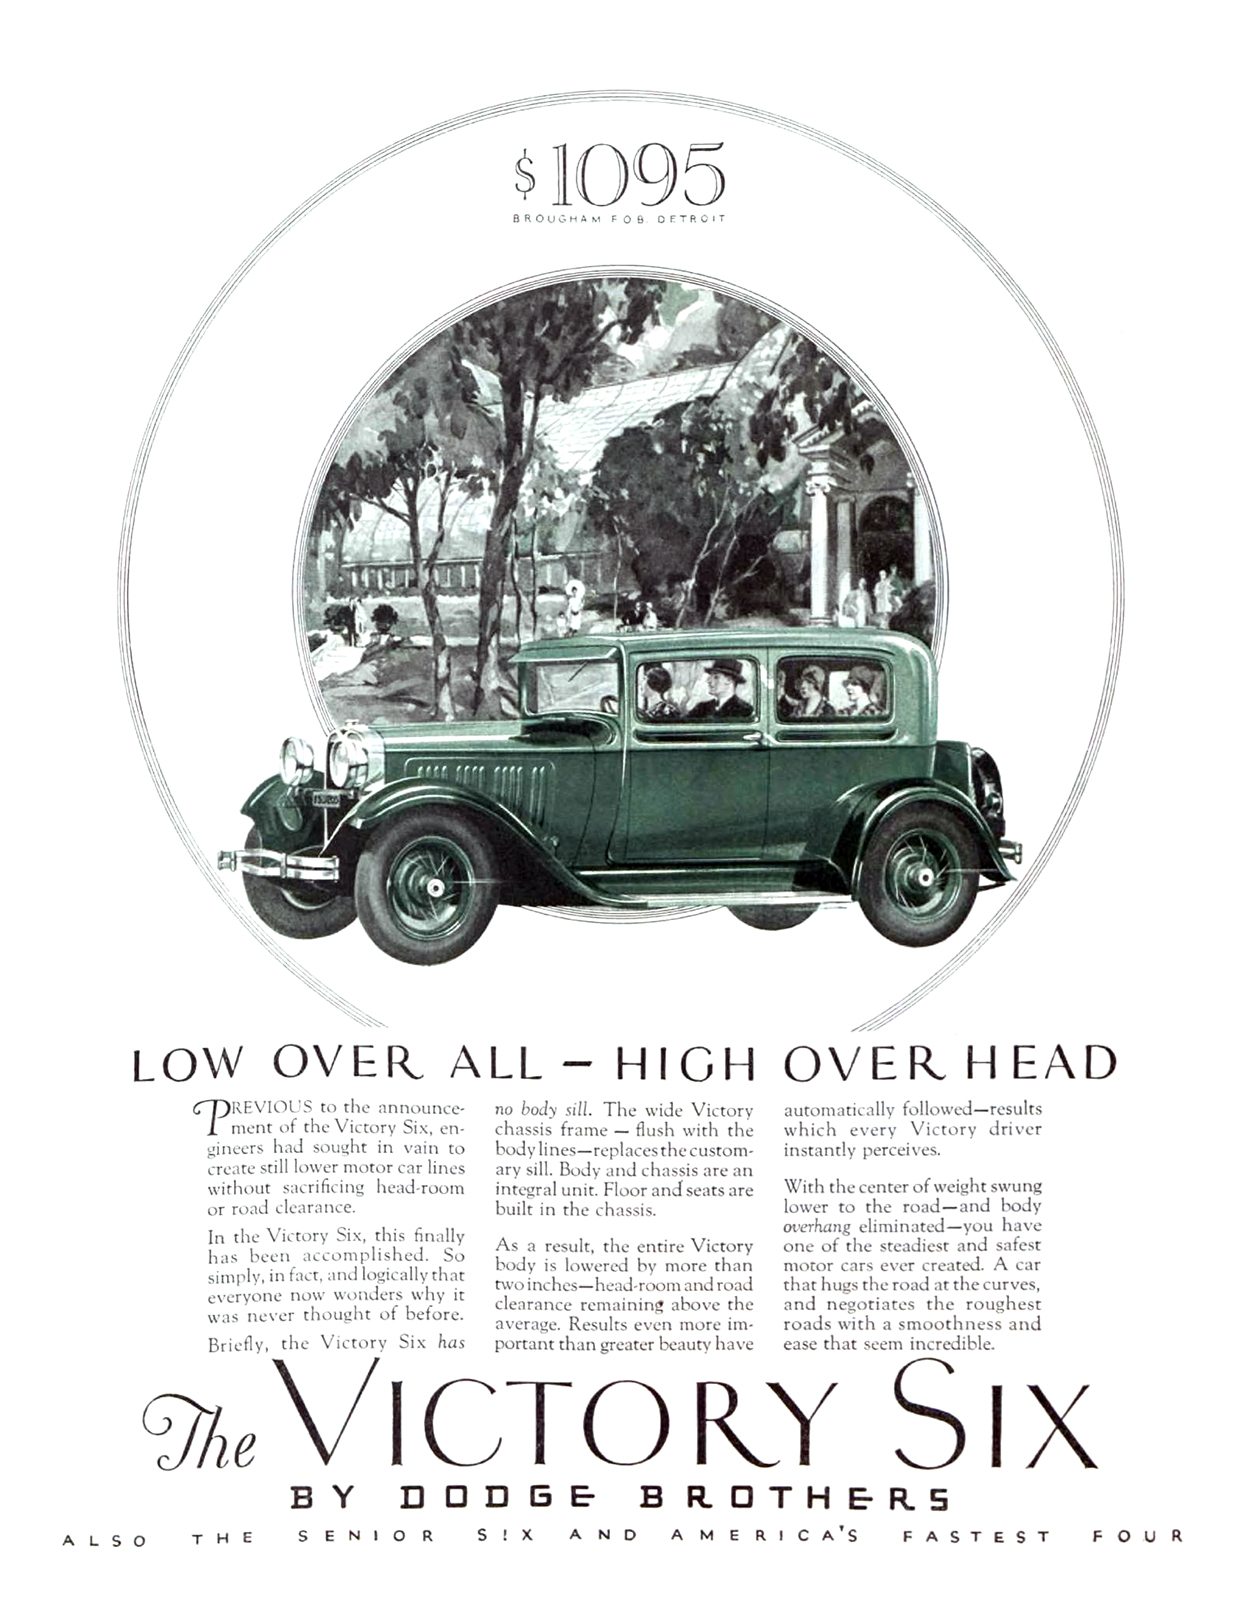 Dodge Brothers Victory Six Brougham Ad (March, 1928): Low over all — high over head